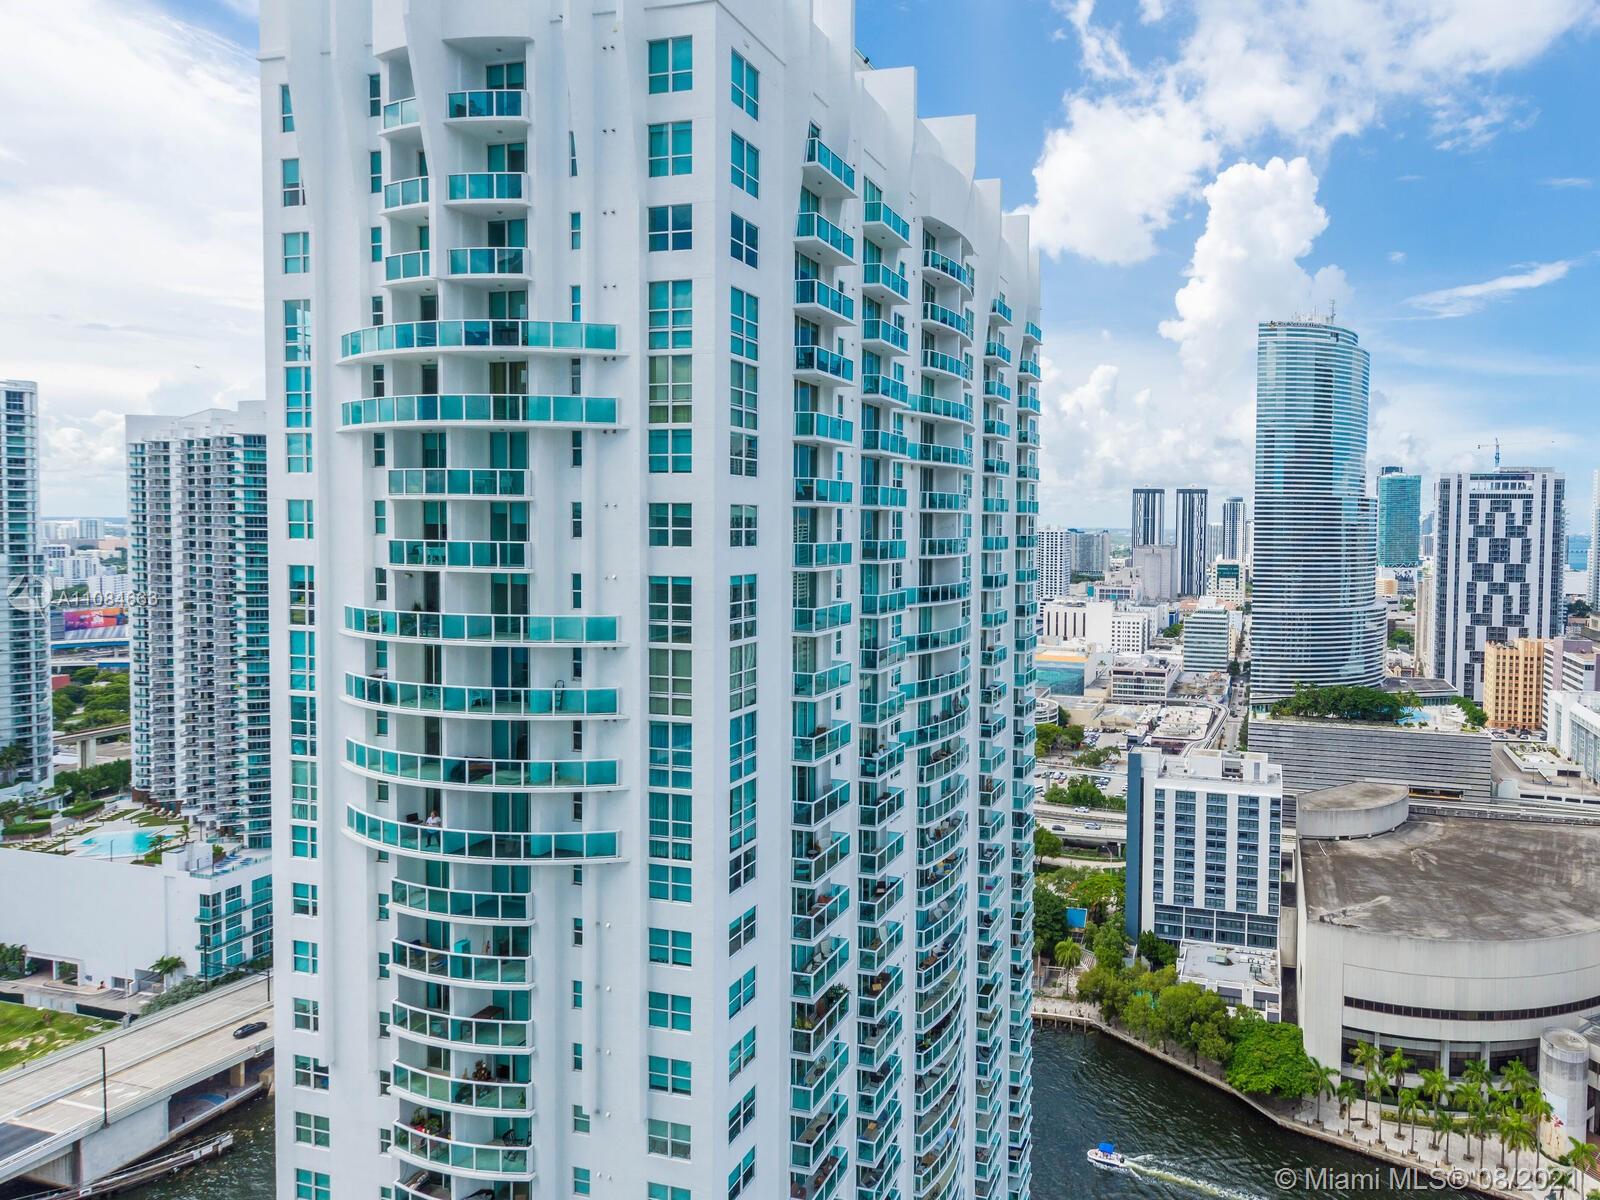 Brickell on the River South image #73